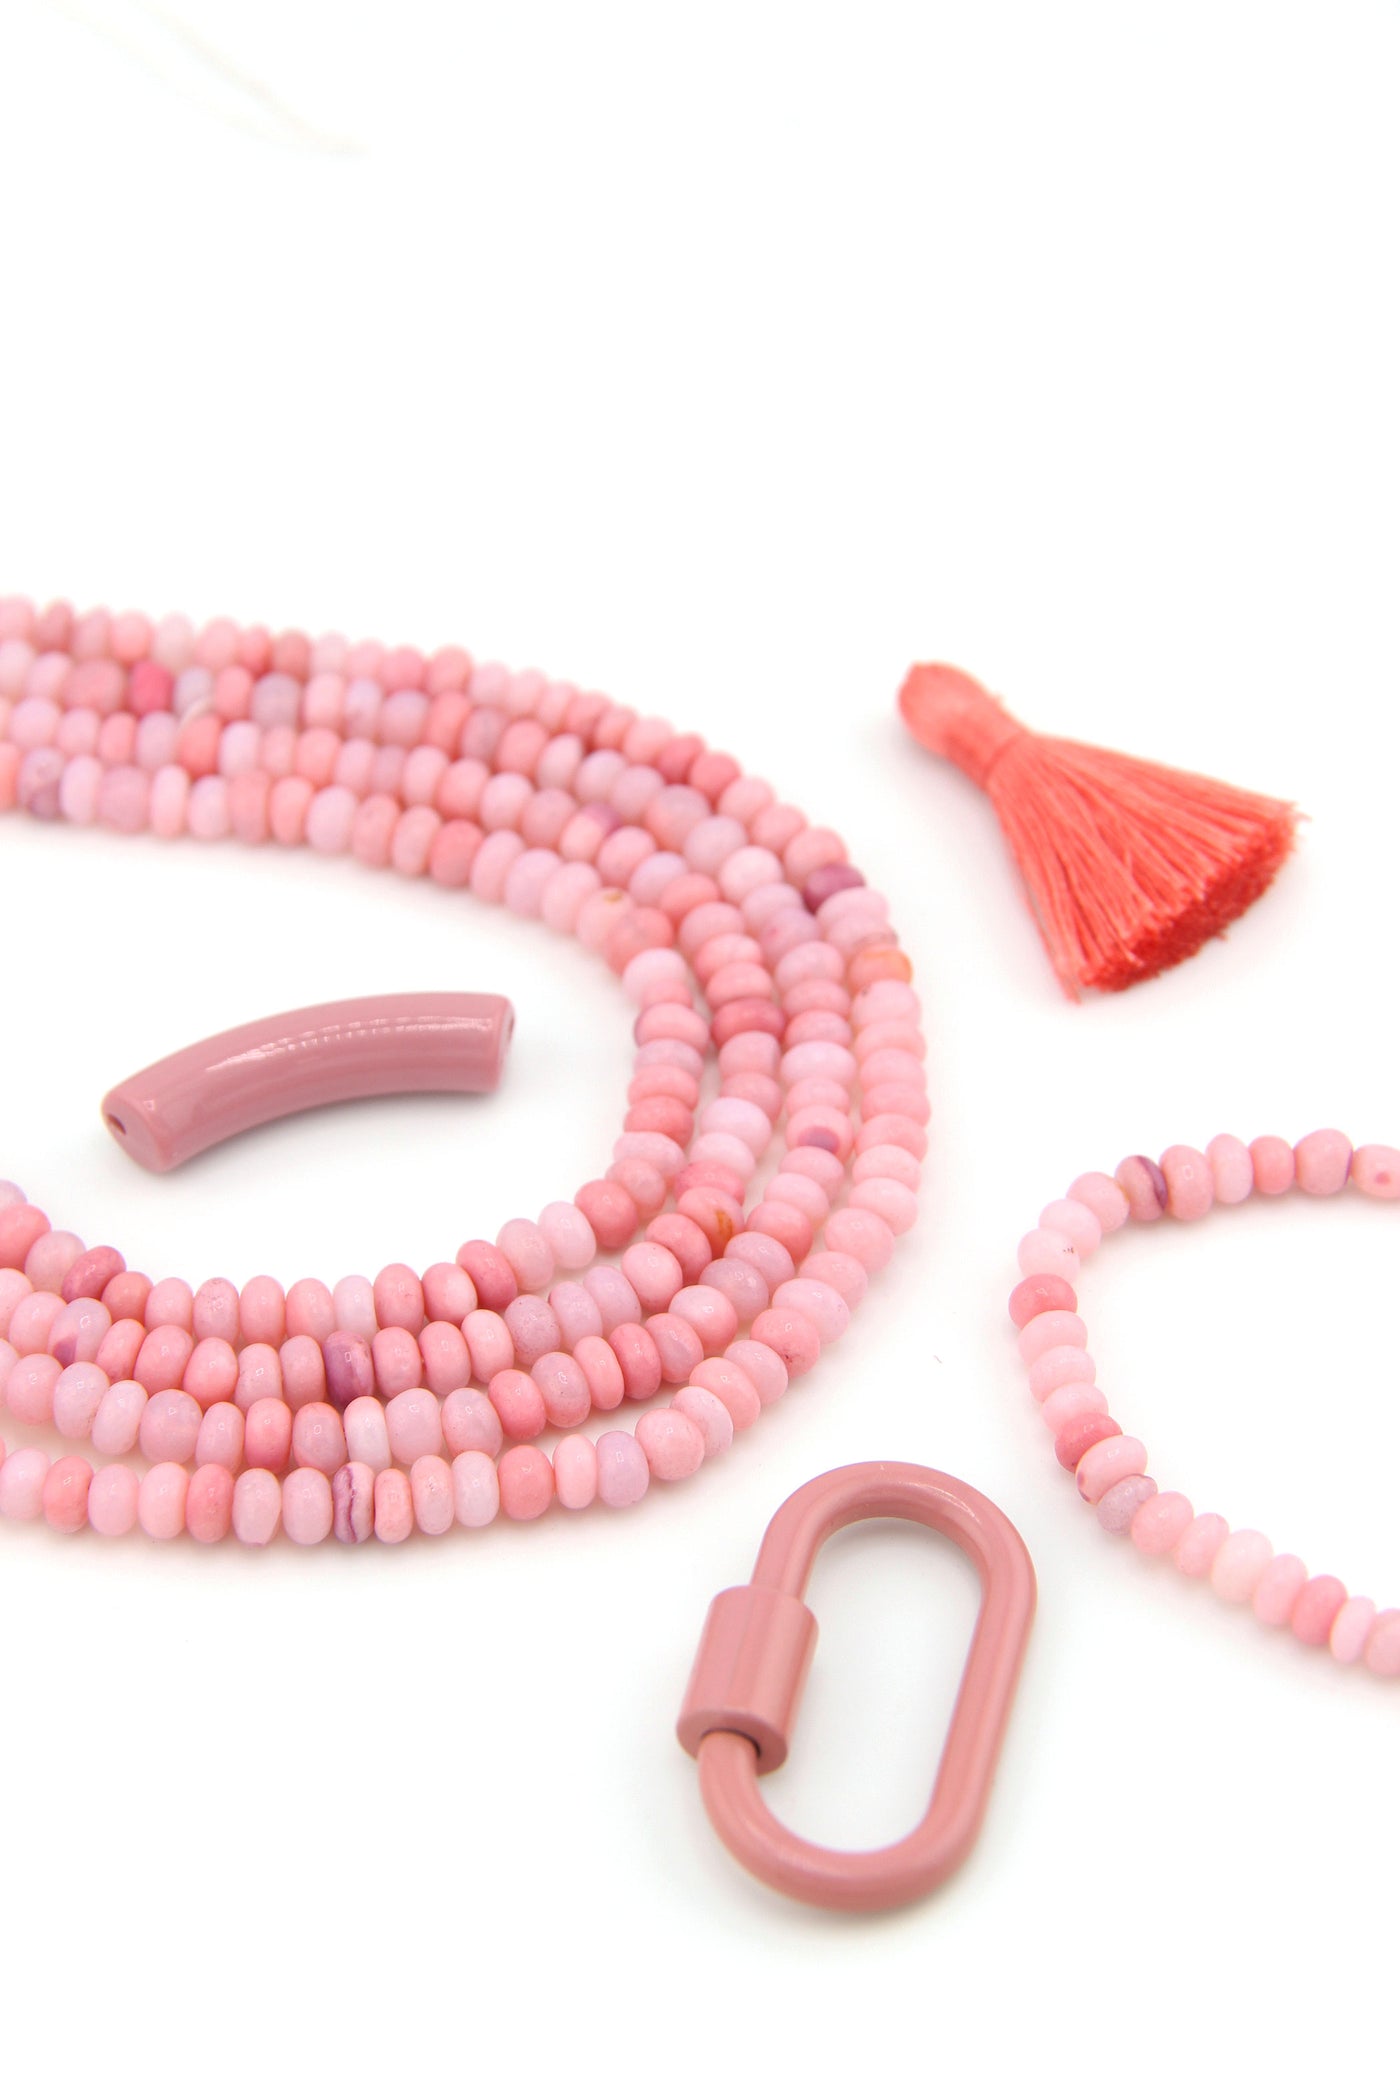 Pastel Flamingo Pink Opal Smooth Rondelle Beads, 5-6mm AA Quality Beads pink DIY bracelets